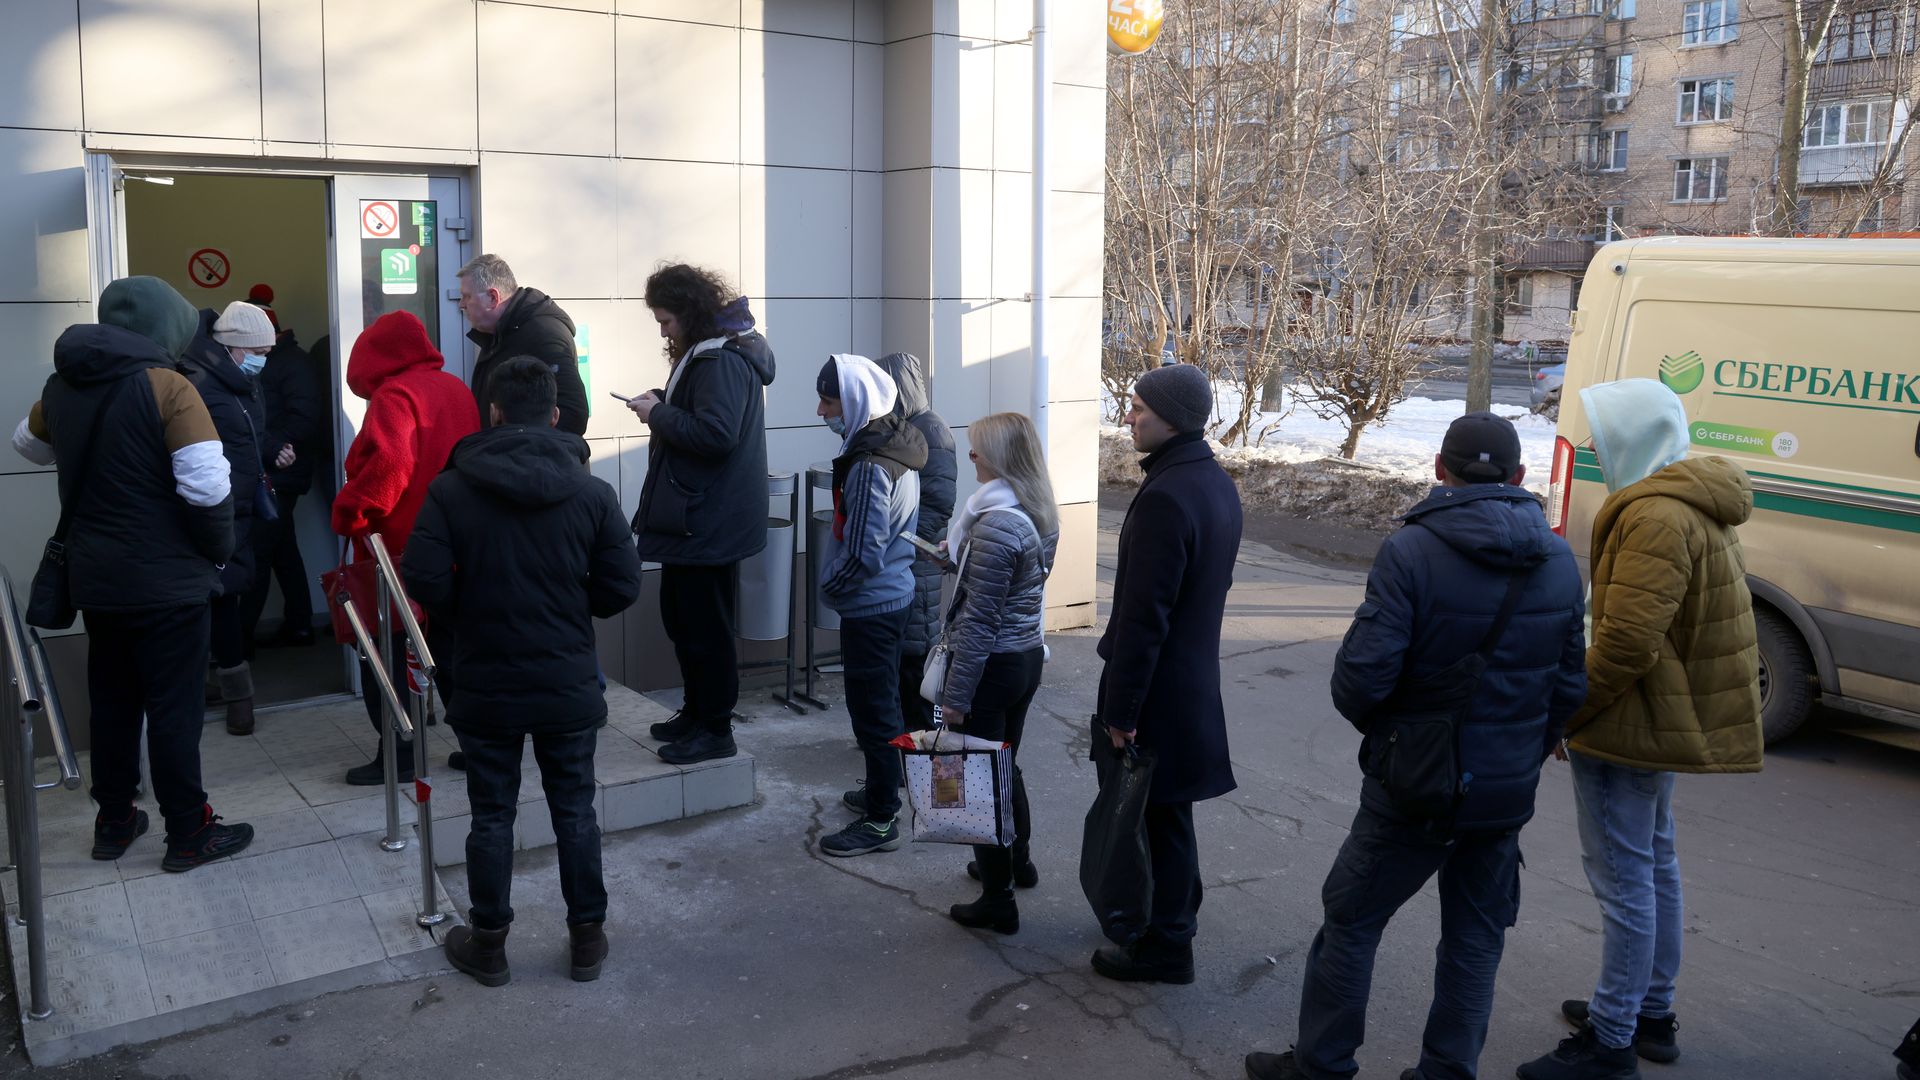 People line up at a bank in Moscow, Russia, on 24 February.